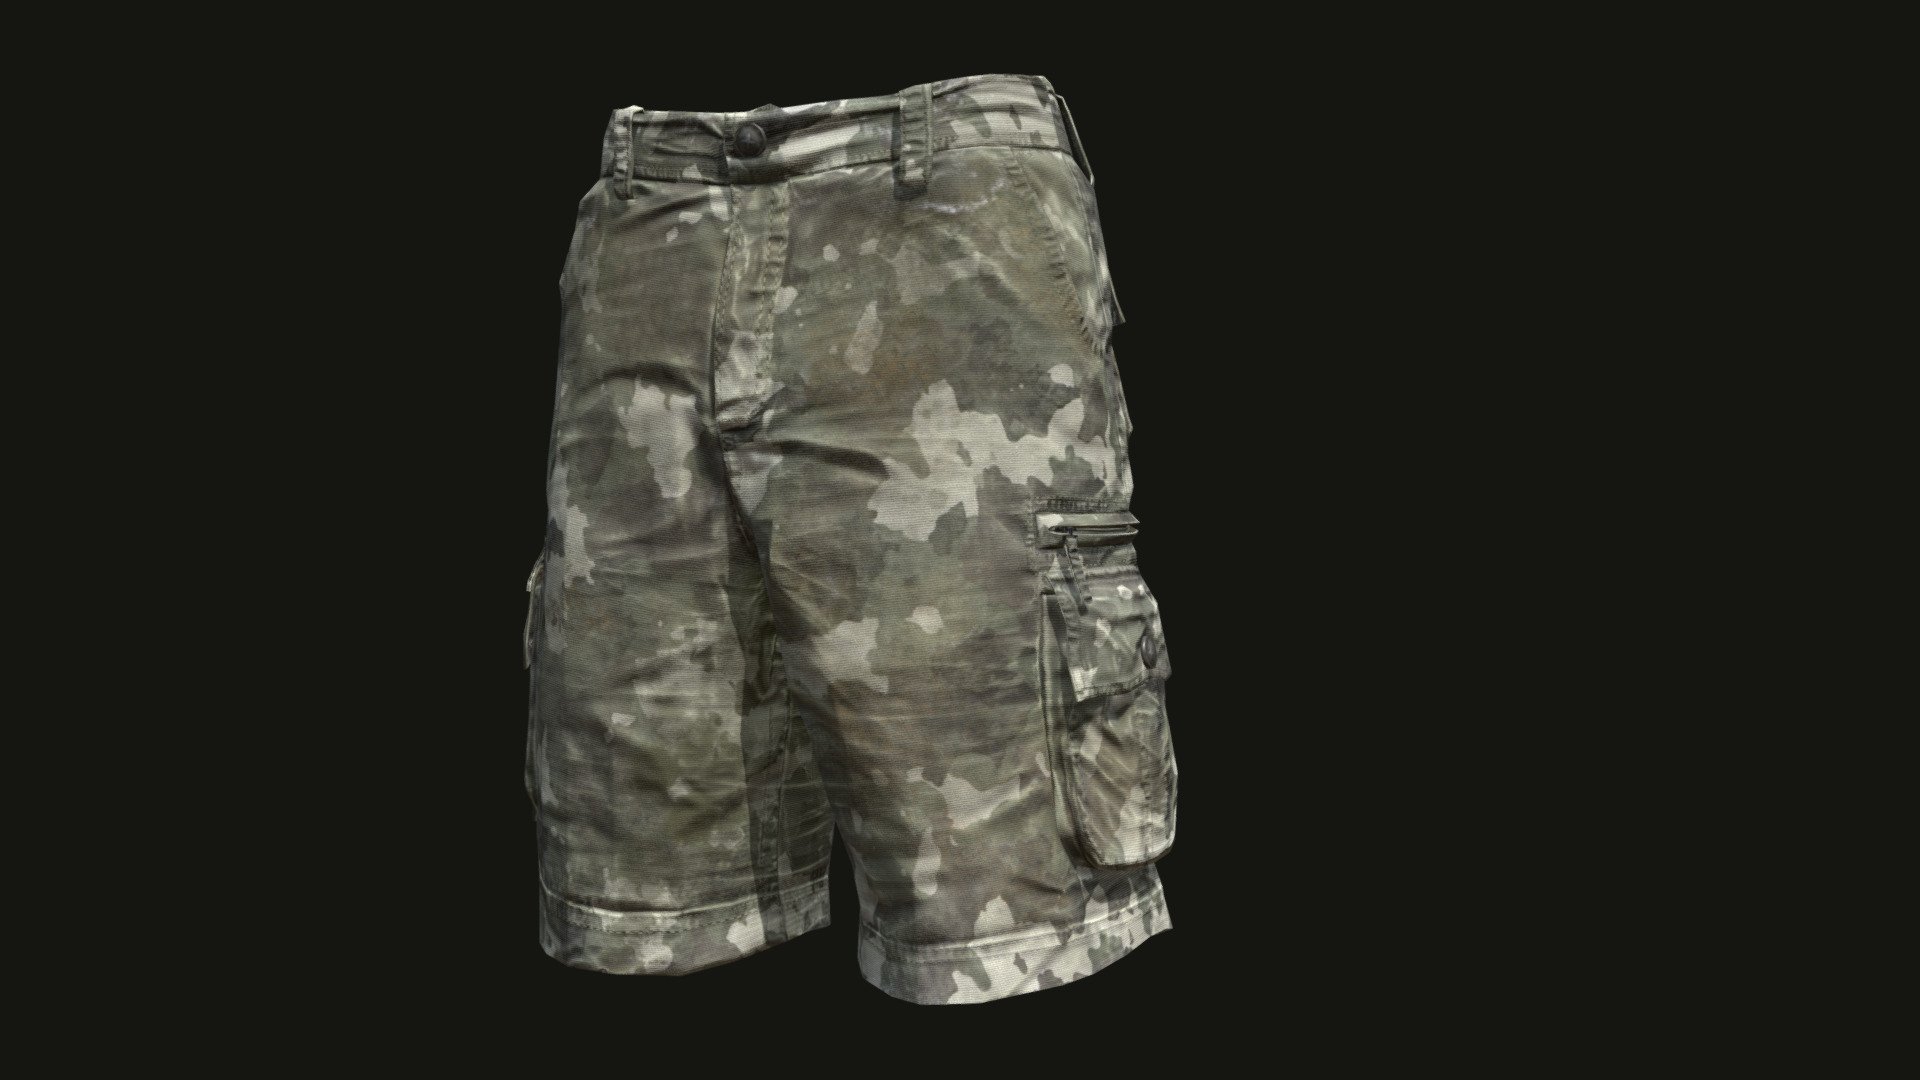 ntroducing the ultimate cargo shorts asset that adds a touch of rugged urban fashion to your game world! Crafted with meticulous attention to detail and optimized for performance, this versatile piece is a must-have for any virtual wardrobe. Elevate your character's attire and immerse players in a world where style meets practicality.

🔥 Key Features:
👖 High-Quality Textures: Immerse players in stunning realism with meticulously crafted 4k textures that bring out every thread and fabric detail. From weathered pockets to intricate stitching, every aspect has been refined to perfection.

🎮 Game-Ready Performance: With a lean 4961 tris polycount, these cargo shorts are optimized for seamless integration into your game. Don't compromise on visual quality or performance – these shorts strike the perfect balance!

Painter File Included for Texture changes 3d model